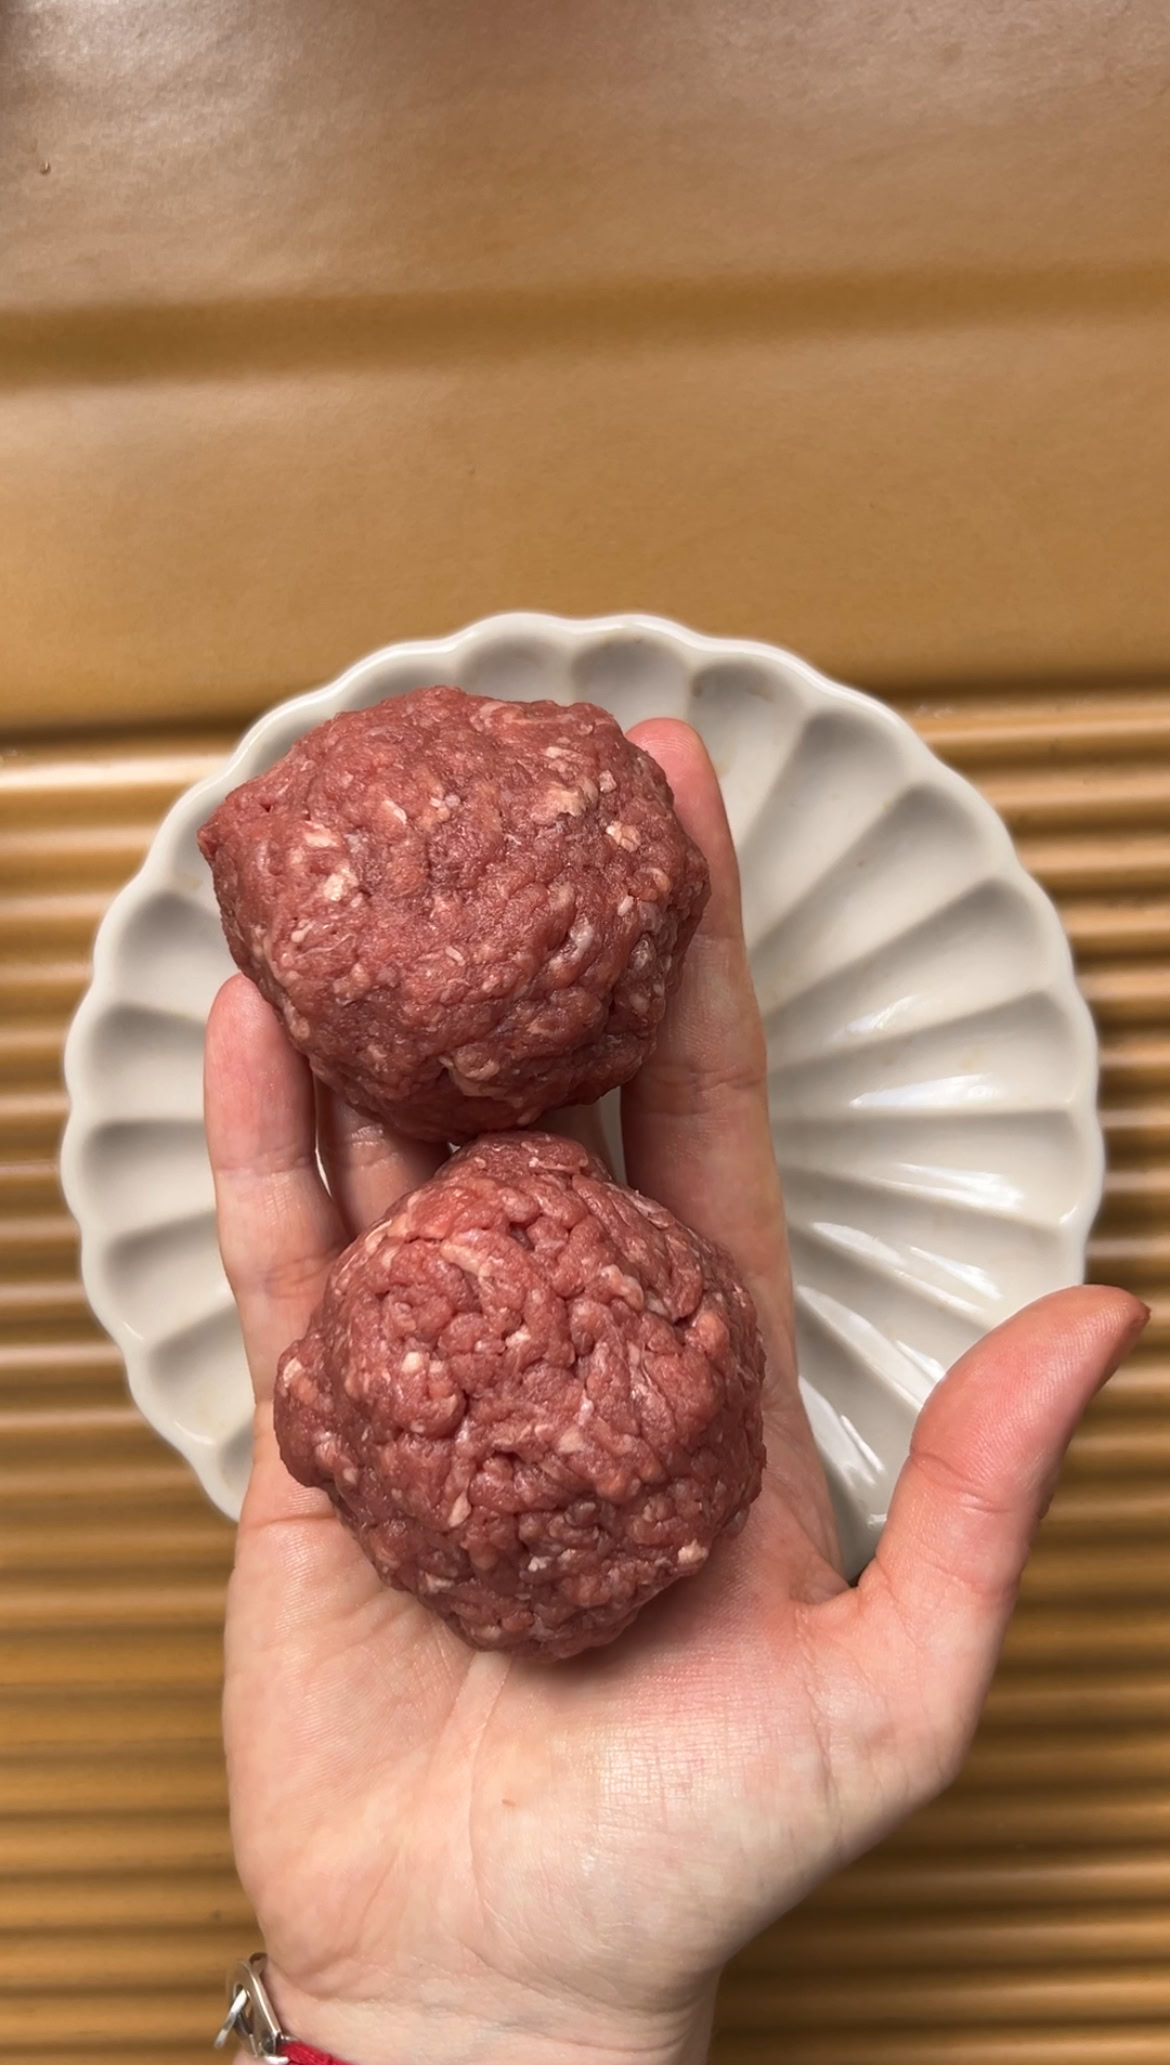 Two balls of uncooked minced meat held in one hand.